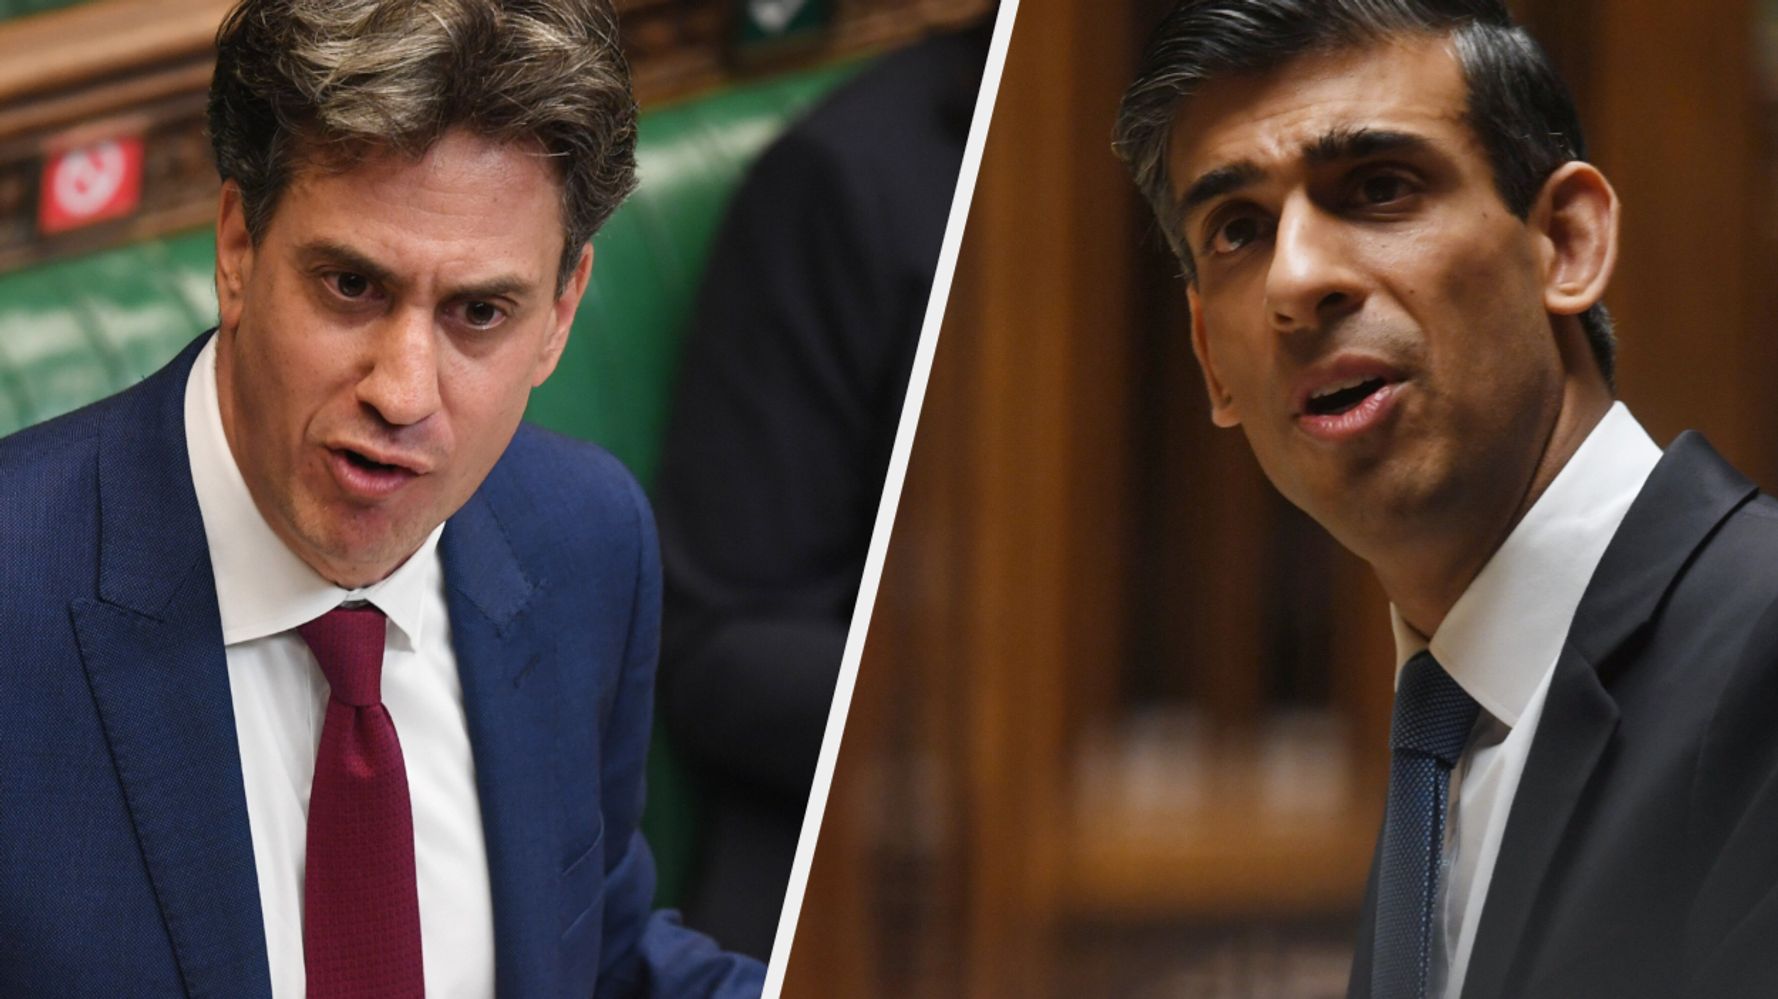 Ed Miliband Calls Rishi Sunak The 'Dude From Silicon Valley' In Blistering Takedown